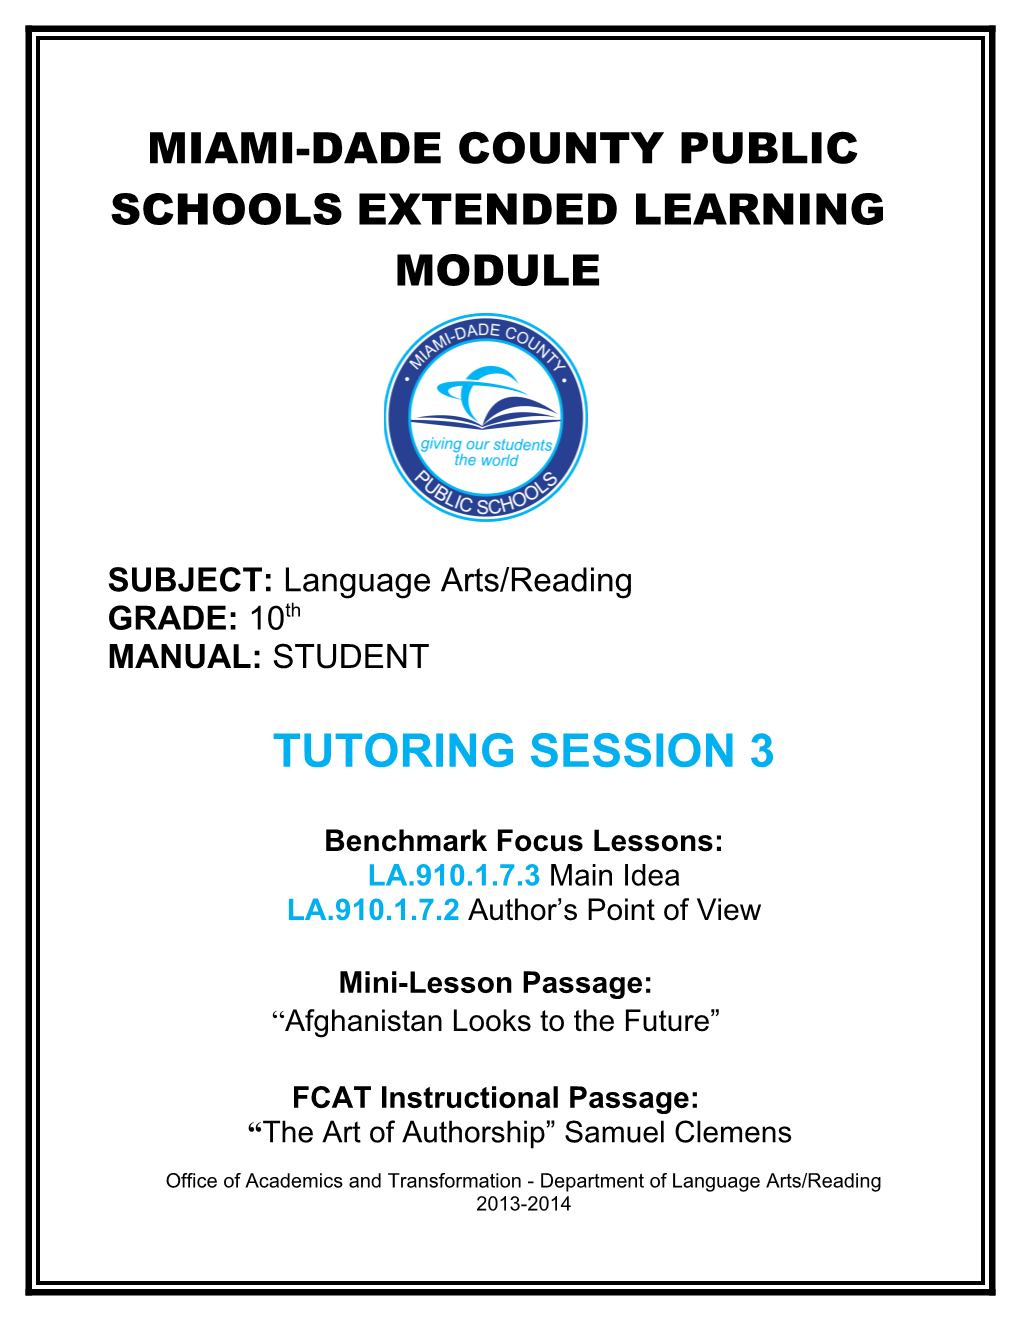 Miami-Dade County Public Schools Extended Learning Module s1